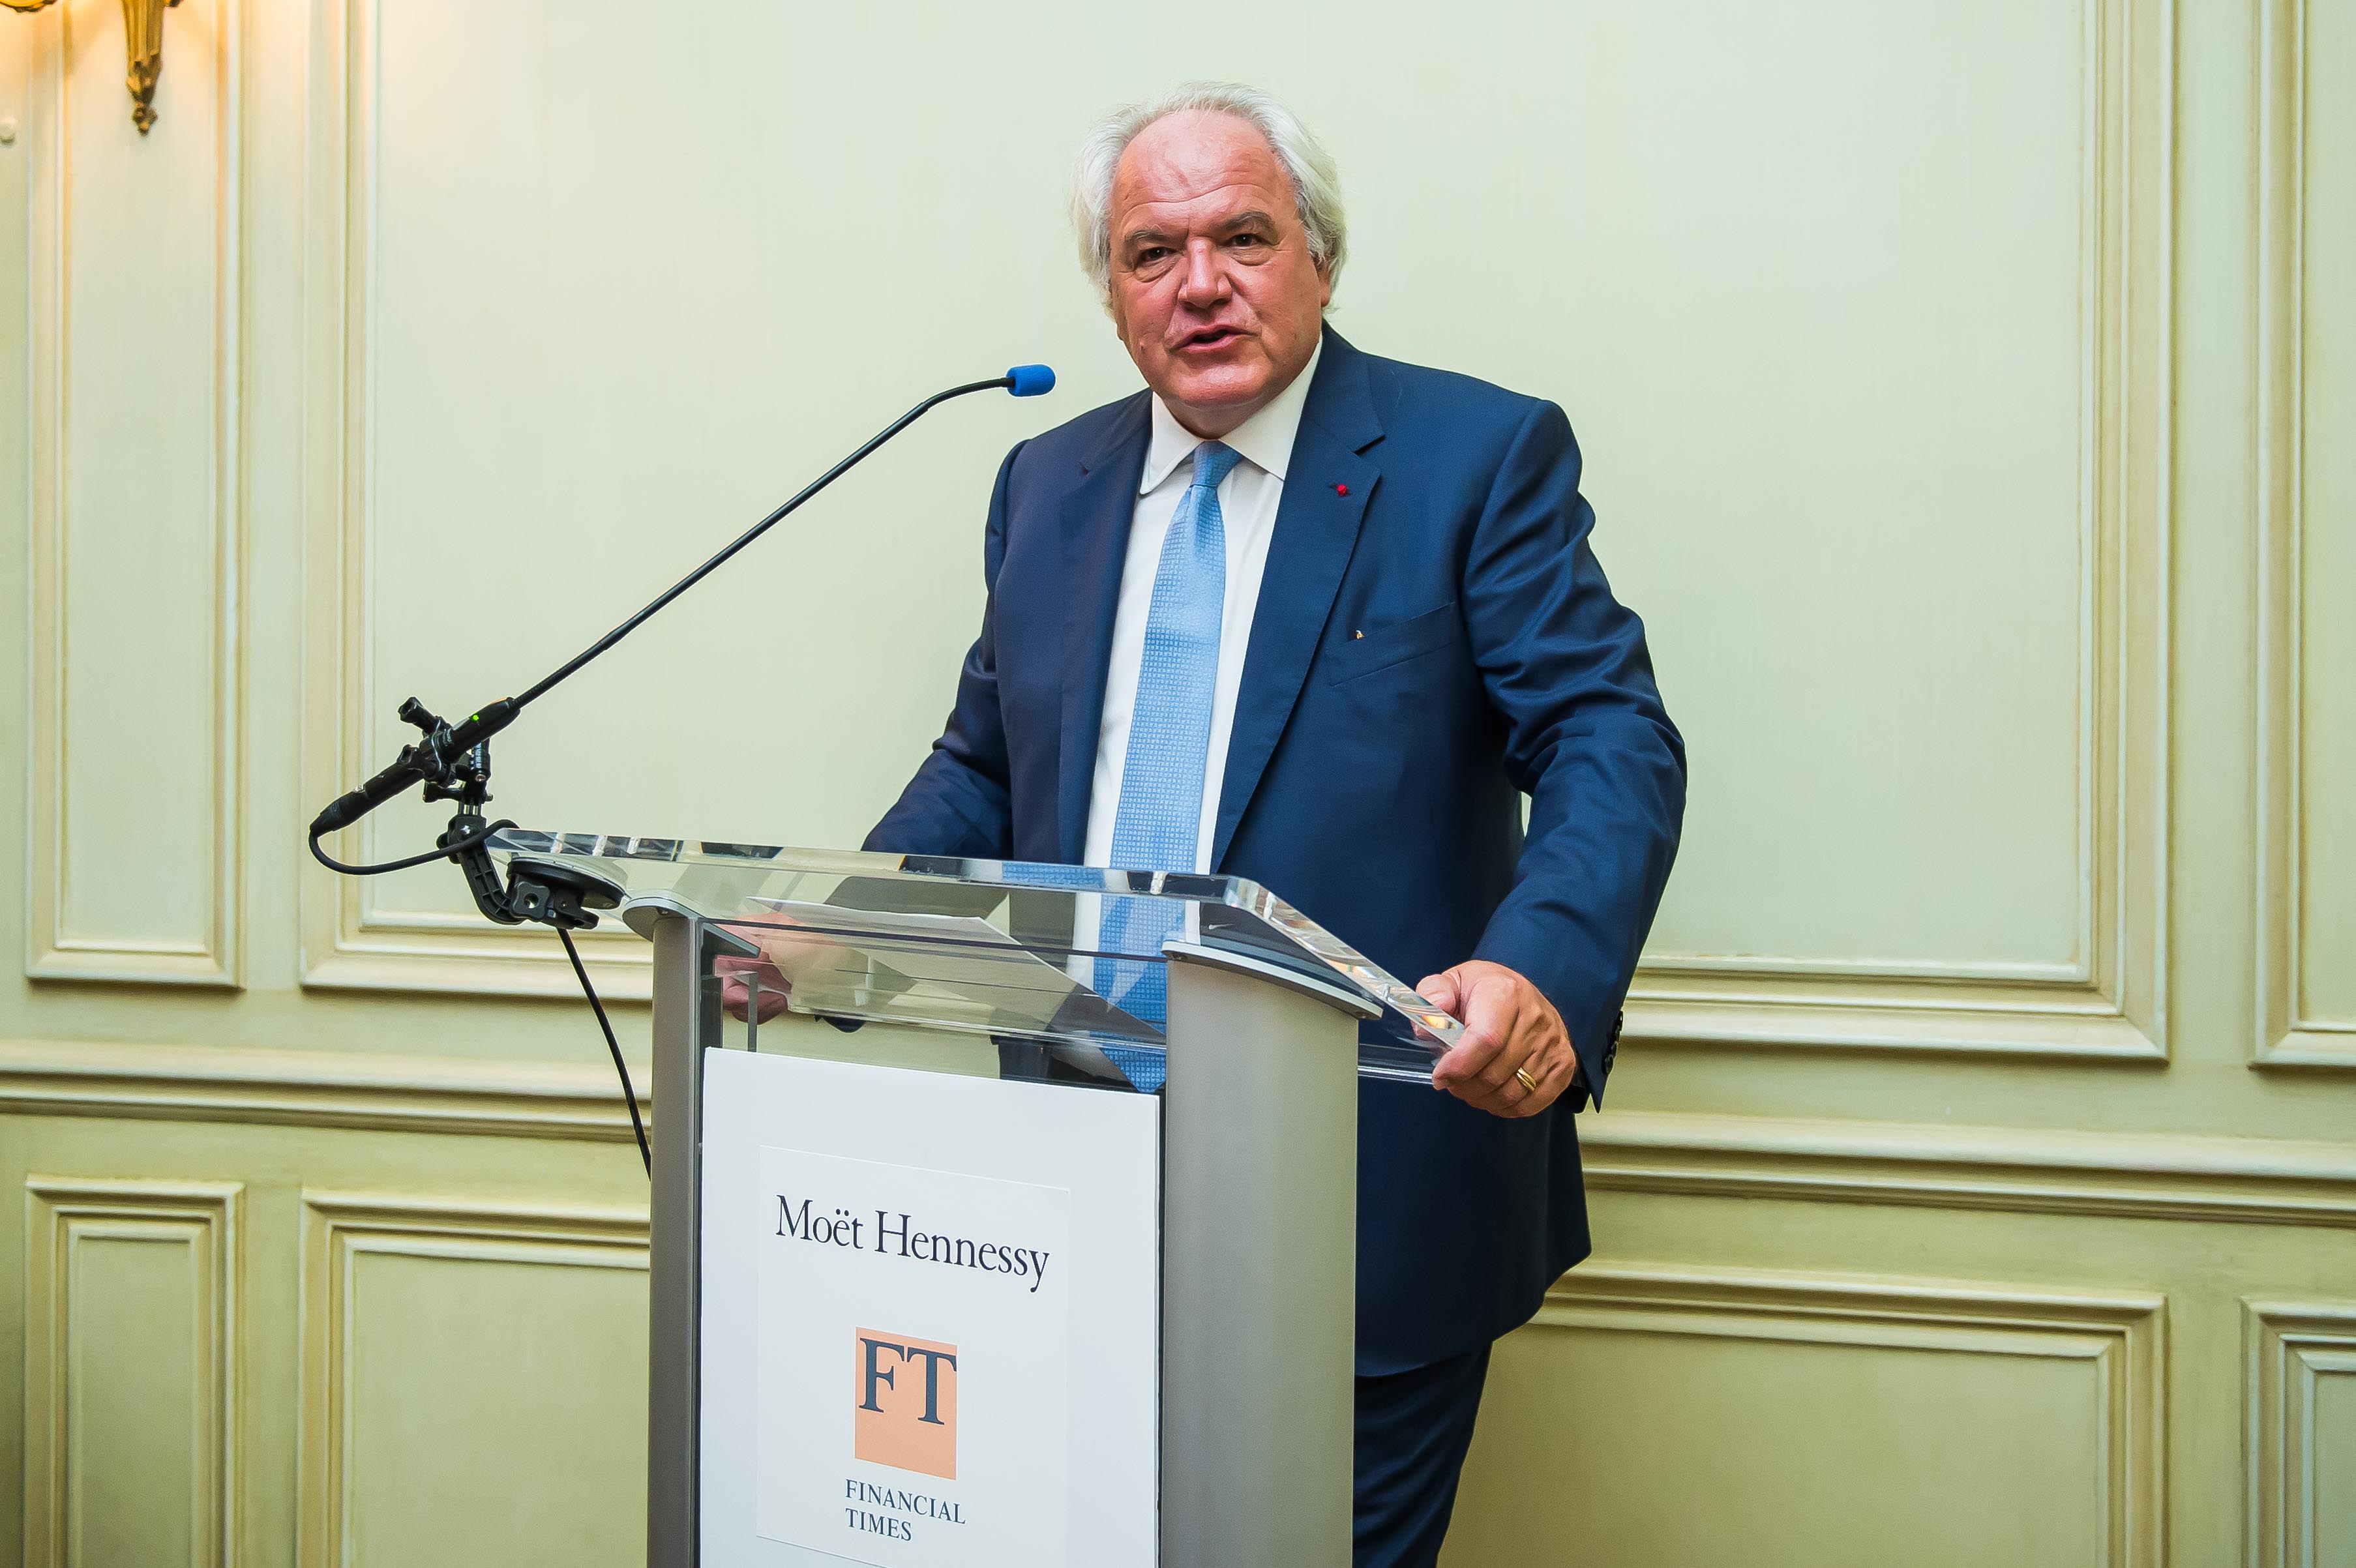 The U.S. -France Leadership Dialogue Continues at Meridian with Moët  Hennessy and The Financial Times